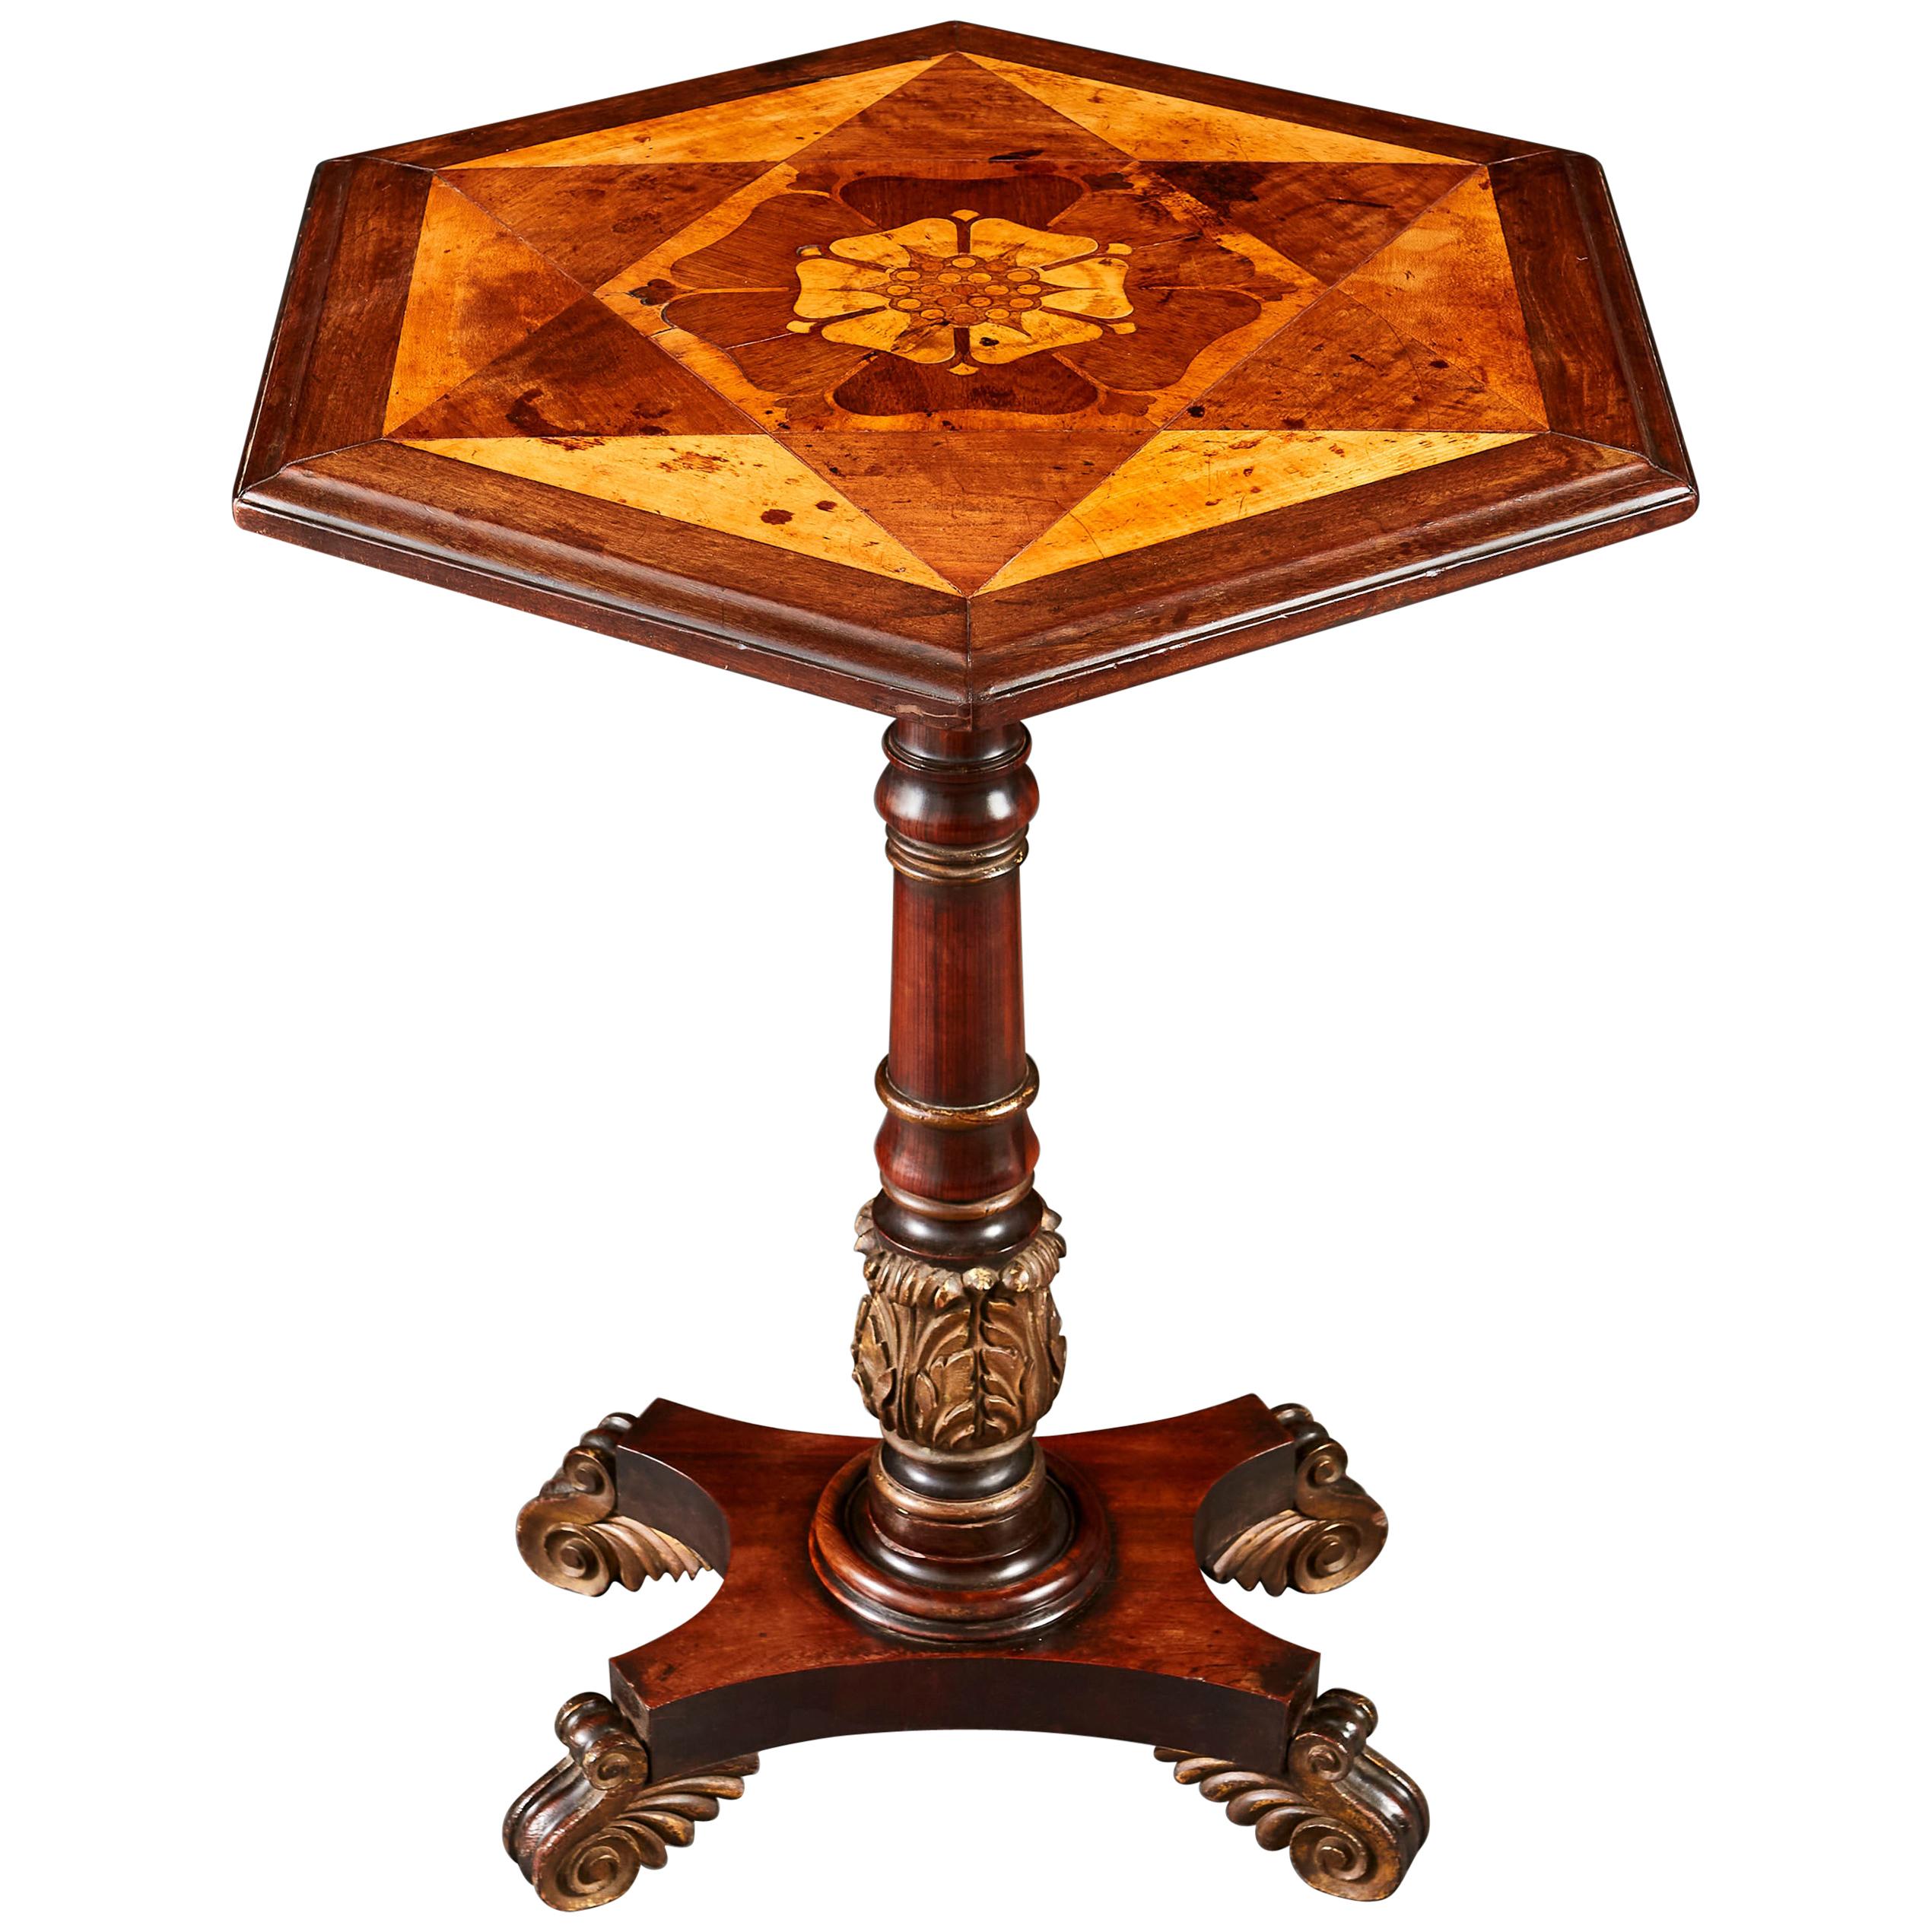 William IV Parquetry Occasional Table with Hexagonal Top Inlaid with Tudor Rose